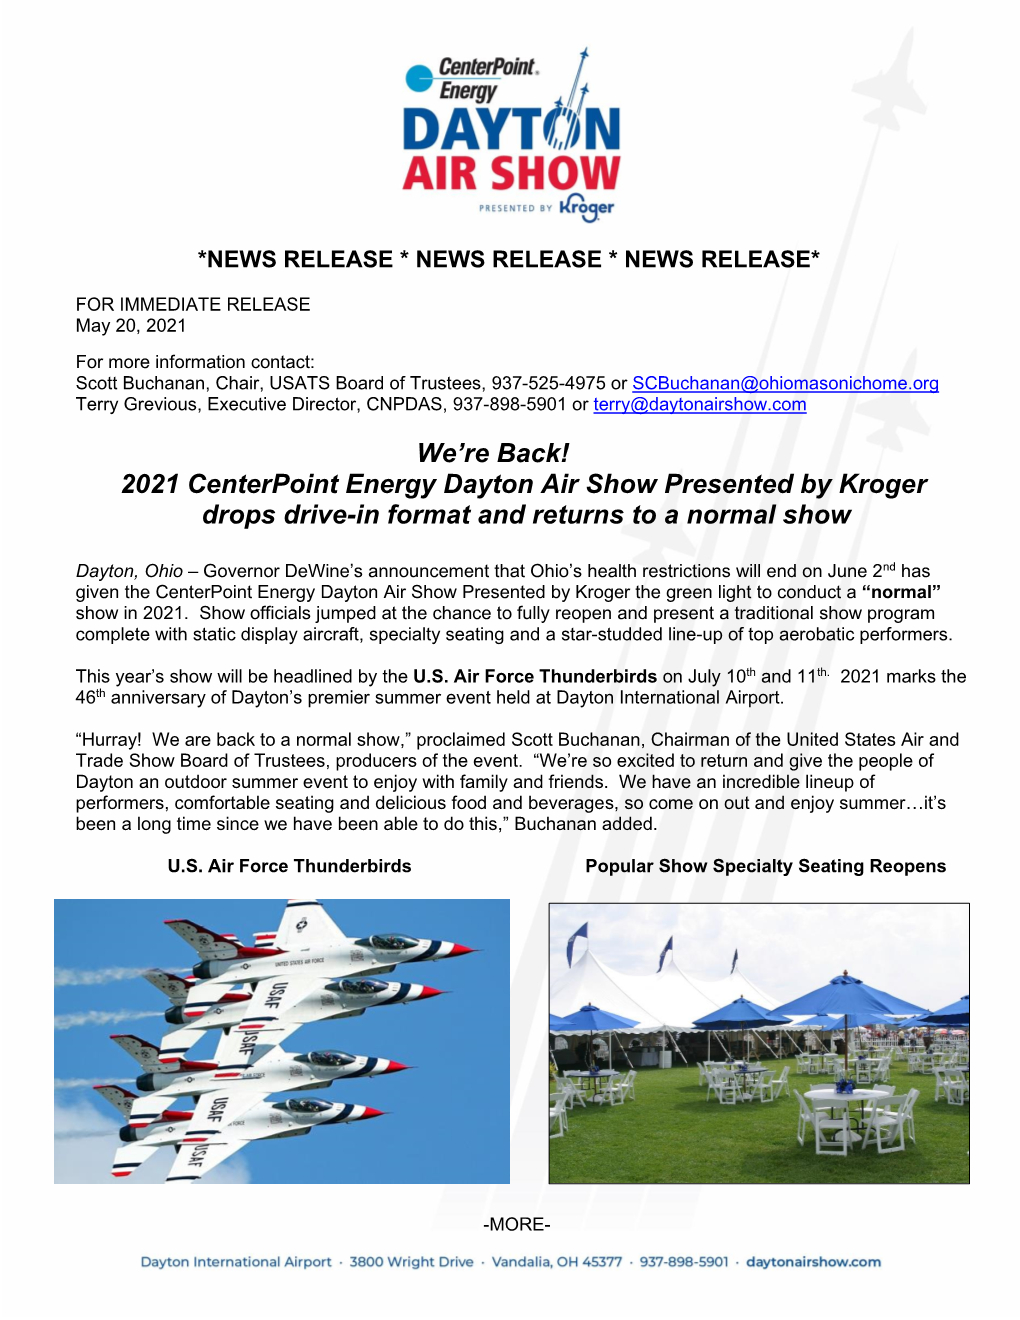 We're Back! 2021 Centerpoint Energy Dayton Air Show Presented By